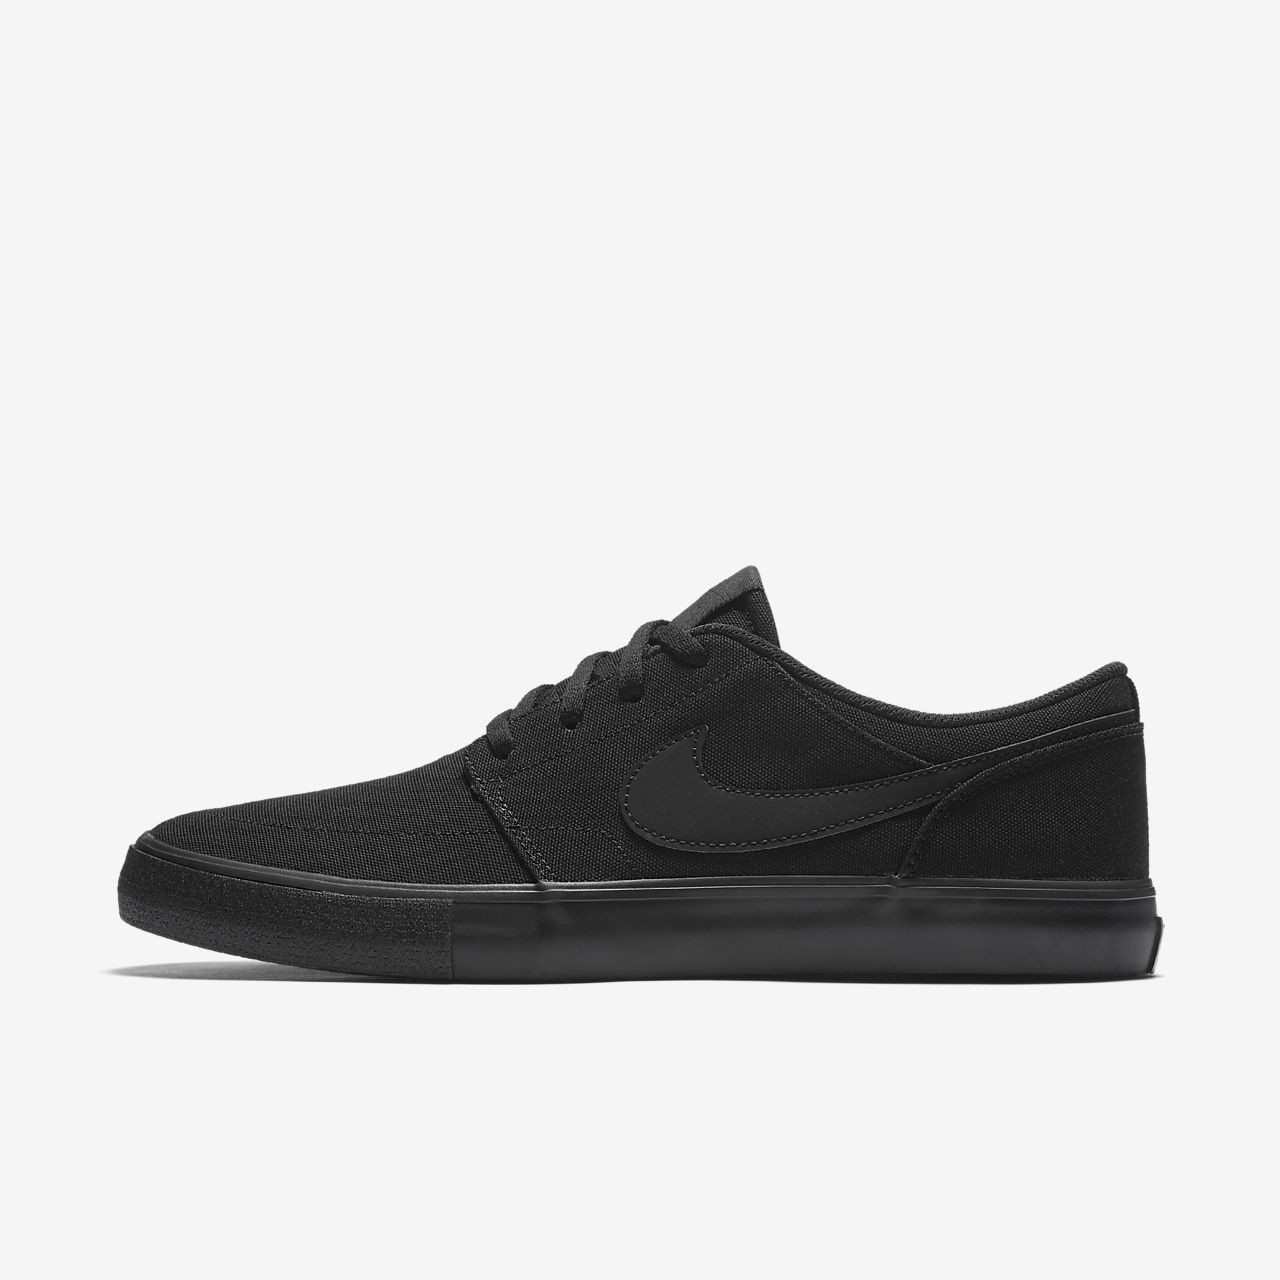 Nike SB Solarsoft Portmore 2 69.99 by SKECHERS | ShoeSales